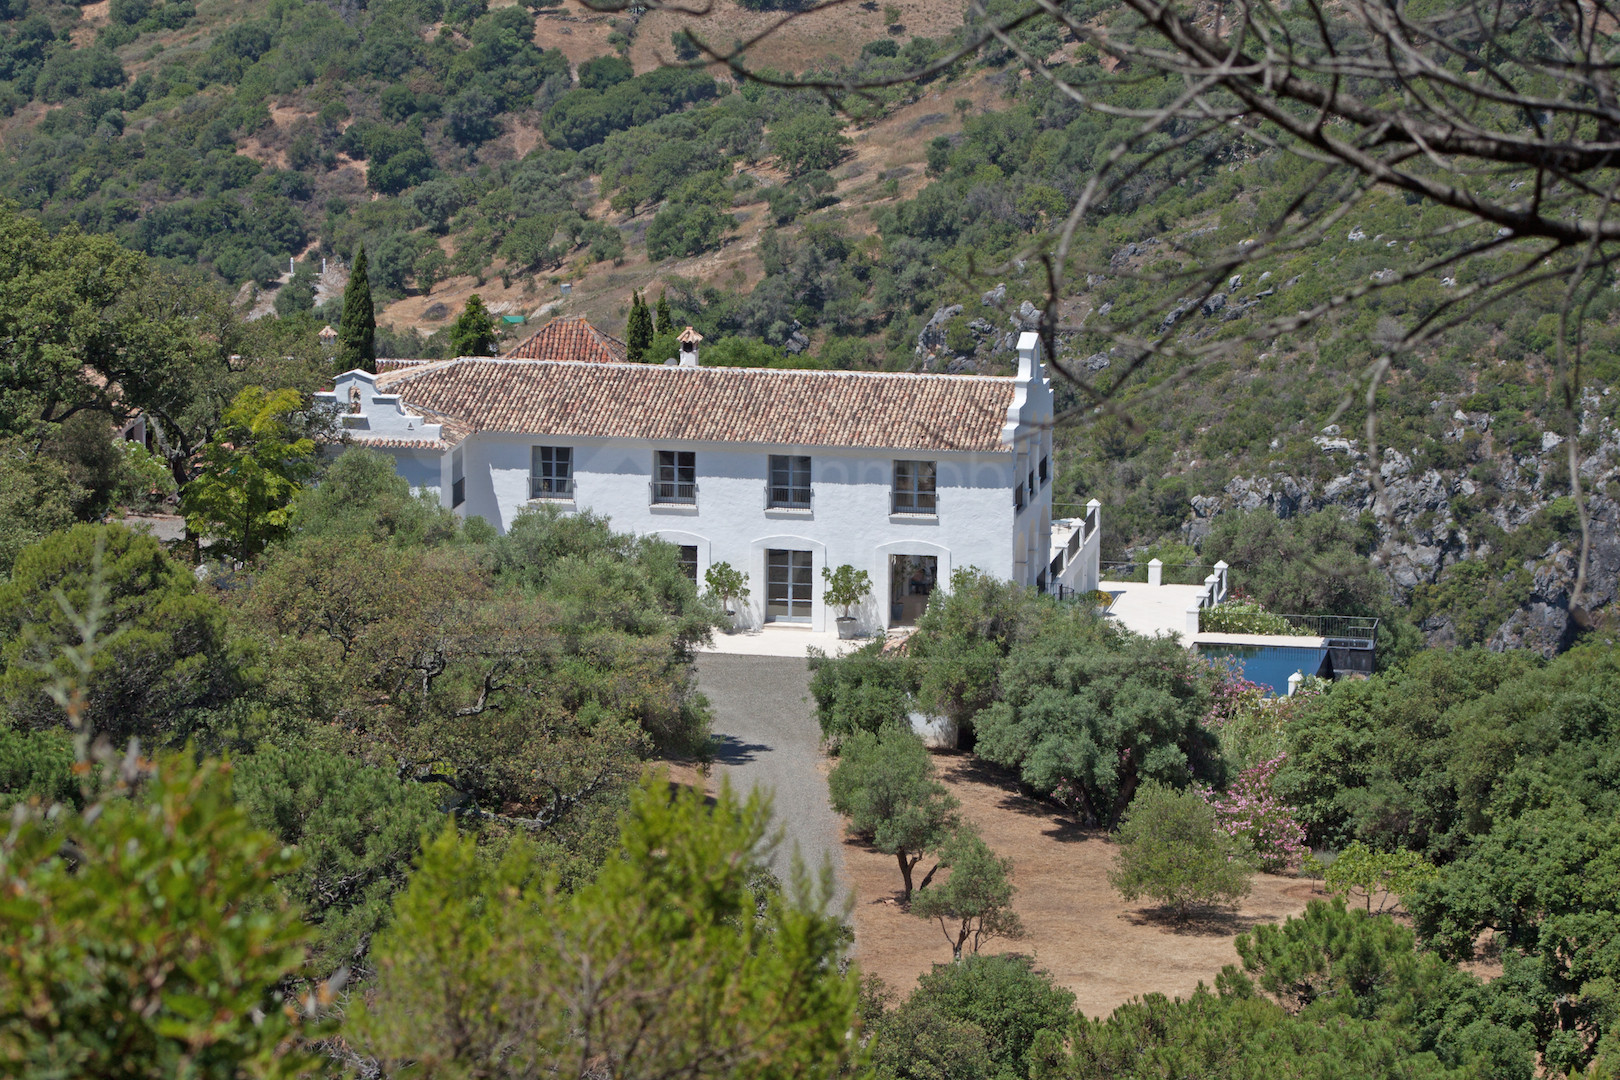 Magnificent 10 bedroom country estate for sale in Casares